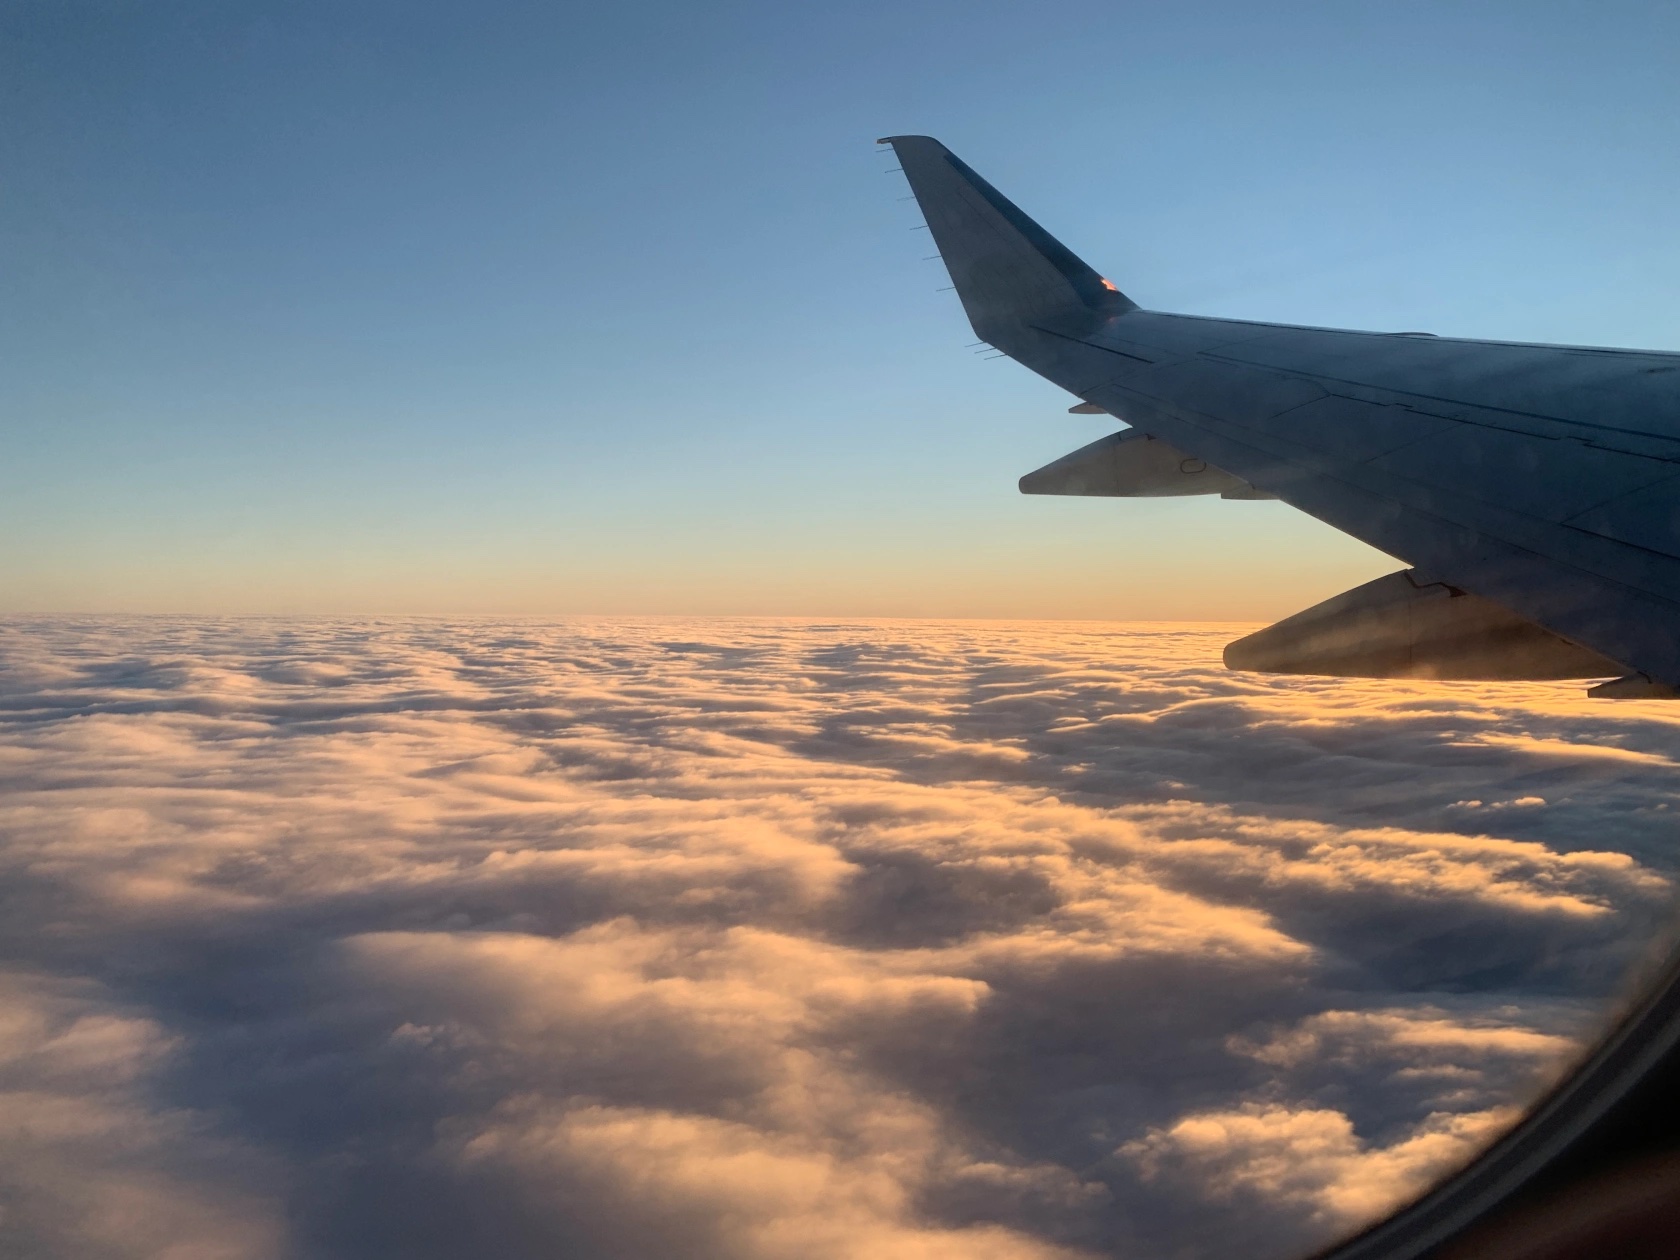 A photograph taken outside of an airborne airplane during golden hour right before sunset. The photo features the wing of the plane on the right, which is also where the sunlight is coming from. There is a sea of clouds along the bottom, with the horizon at about halfway up the photo. The clouds glow slightly golden. The plane wing is mostly in shadow.